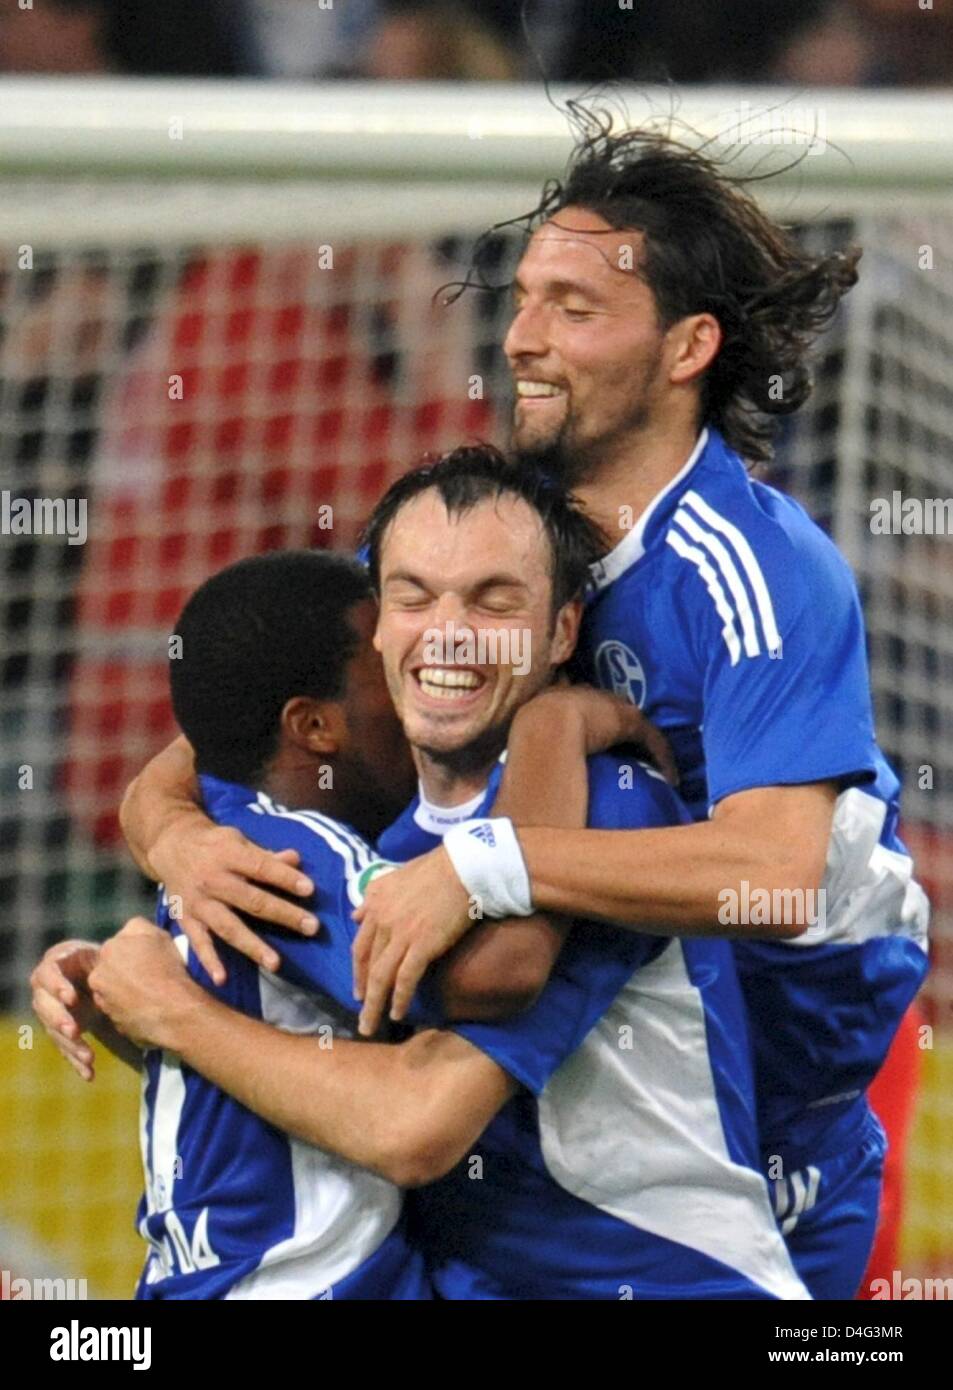 Schalke's Heiko Westermann (C) cheers with teammates Jefferson Farfan (L) and Kevin Kuranyi after his 1-0 score in the DFB Cup second round match FC Schalke 04 vs Hanover 96 at Veltins Arena stadium in Gelsenkirchen, Germany, 23 September 2008. Schalke defeated Hanover 2-0 to move on to the last 16 of the German Cup. Photo: Bernd Thissen Stock Photo